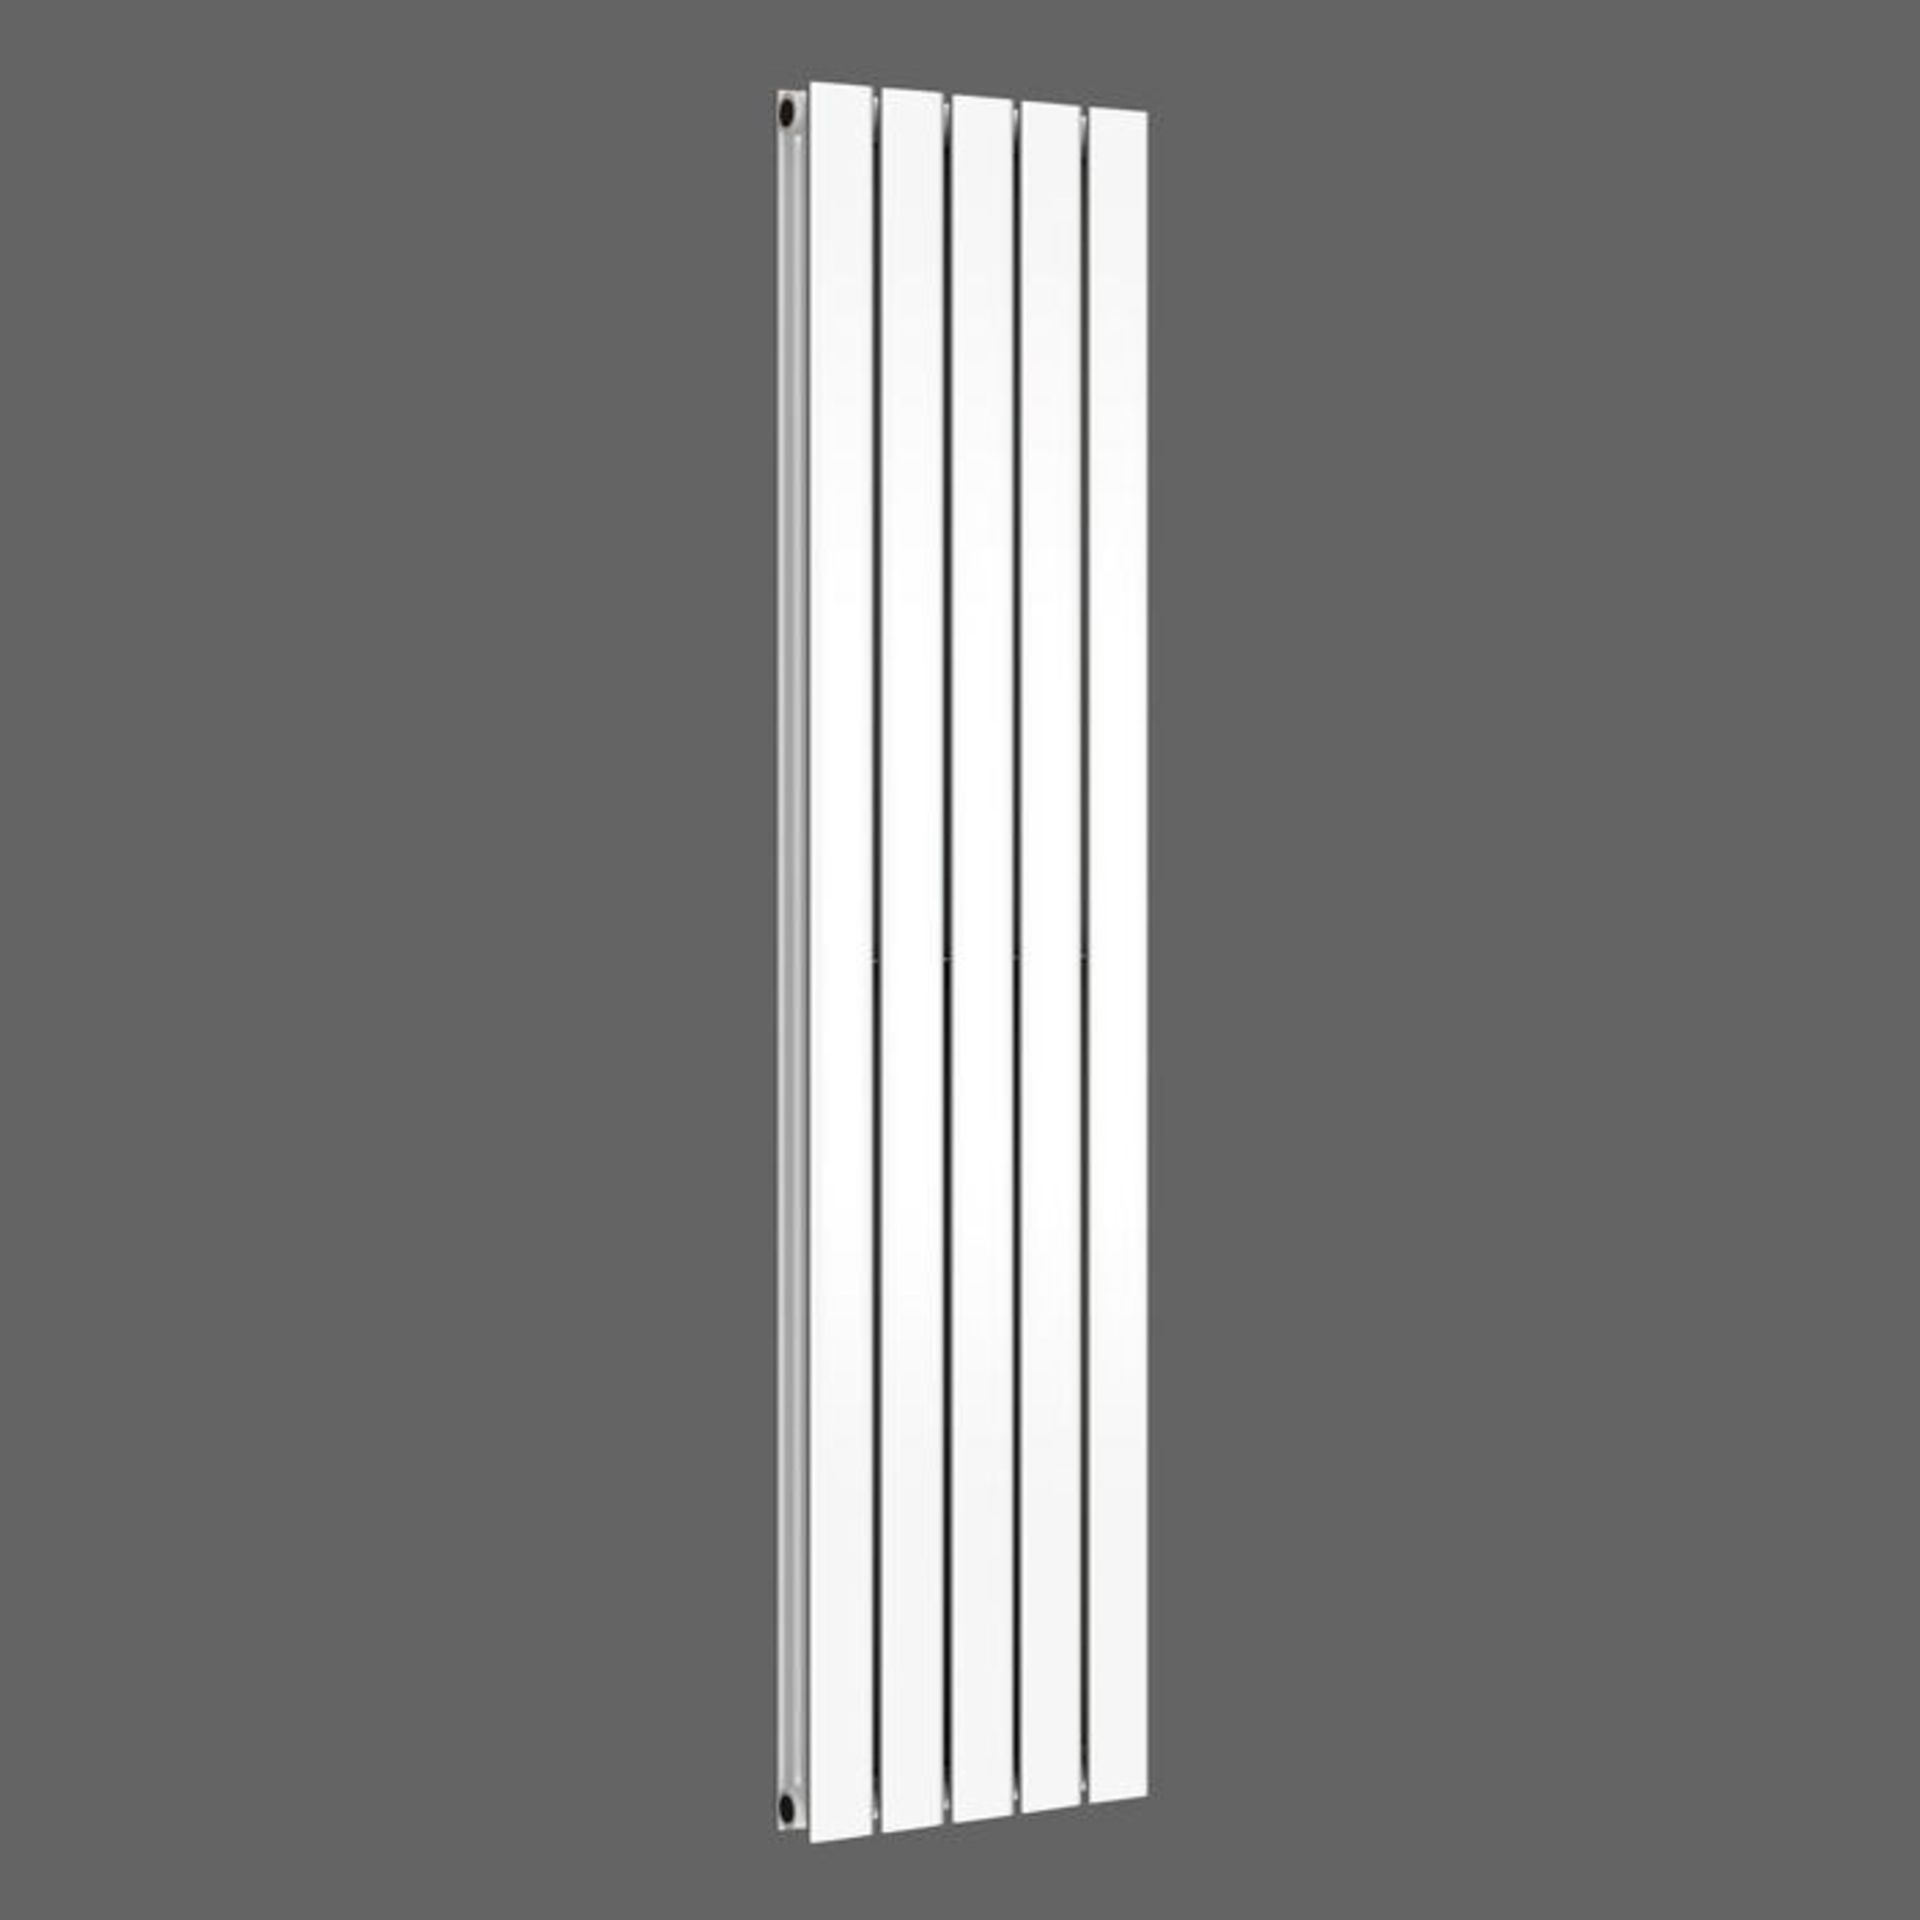 New 1600x360mm Gloss White Double Flat Panel Vertical Radiator. RRP £382.99.We Love This Beca... - Image 2 of 2